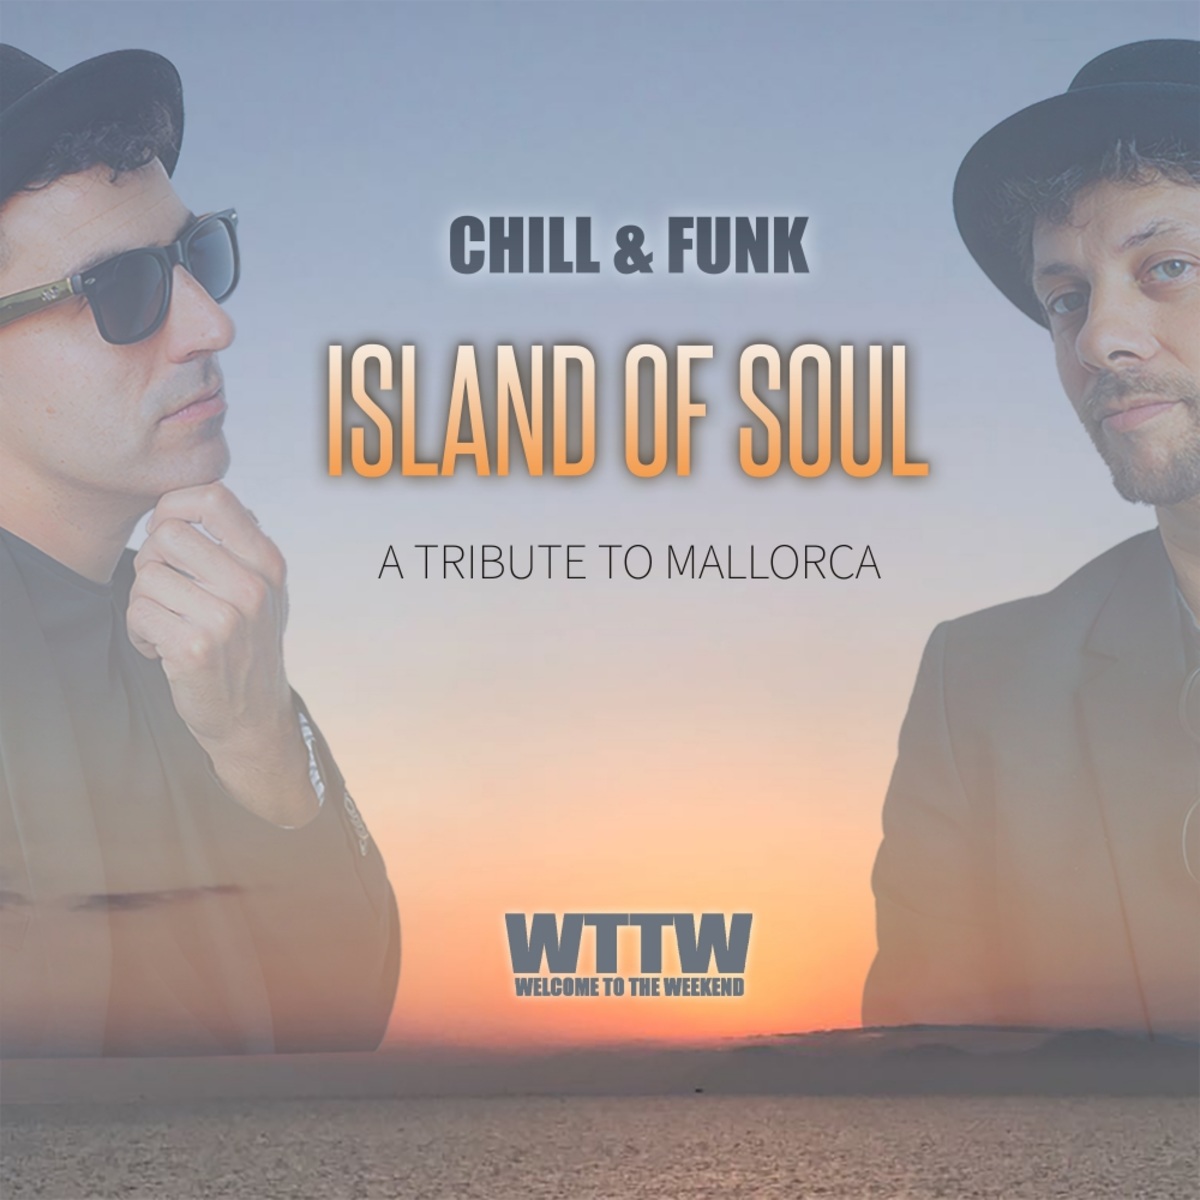 Chill&Funk - Island Of Soul / Welcome To The Weekend